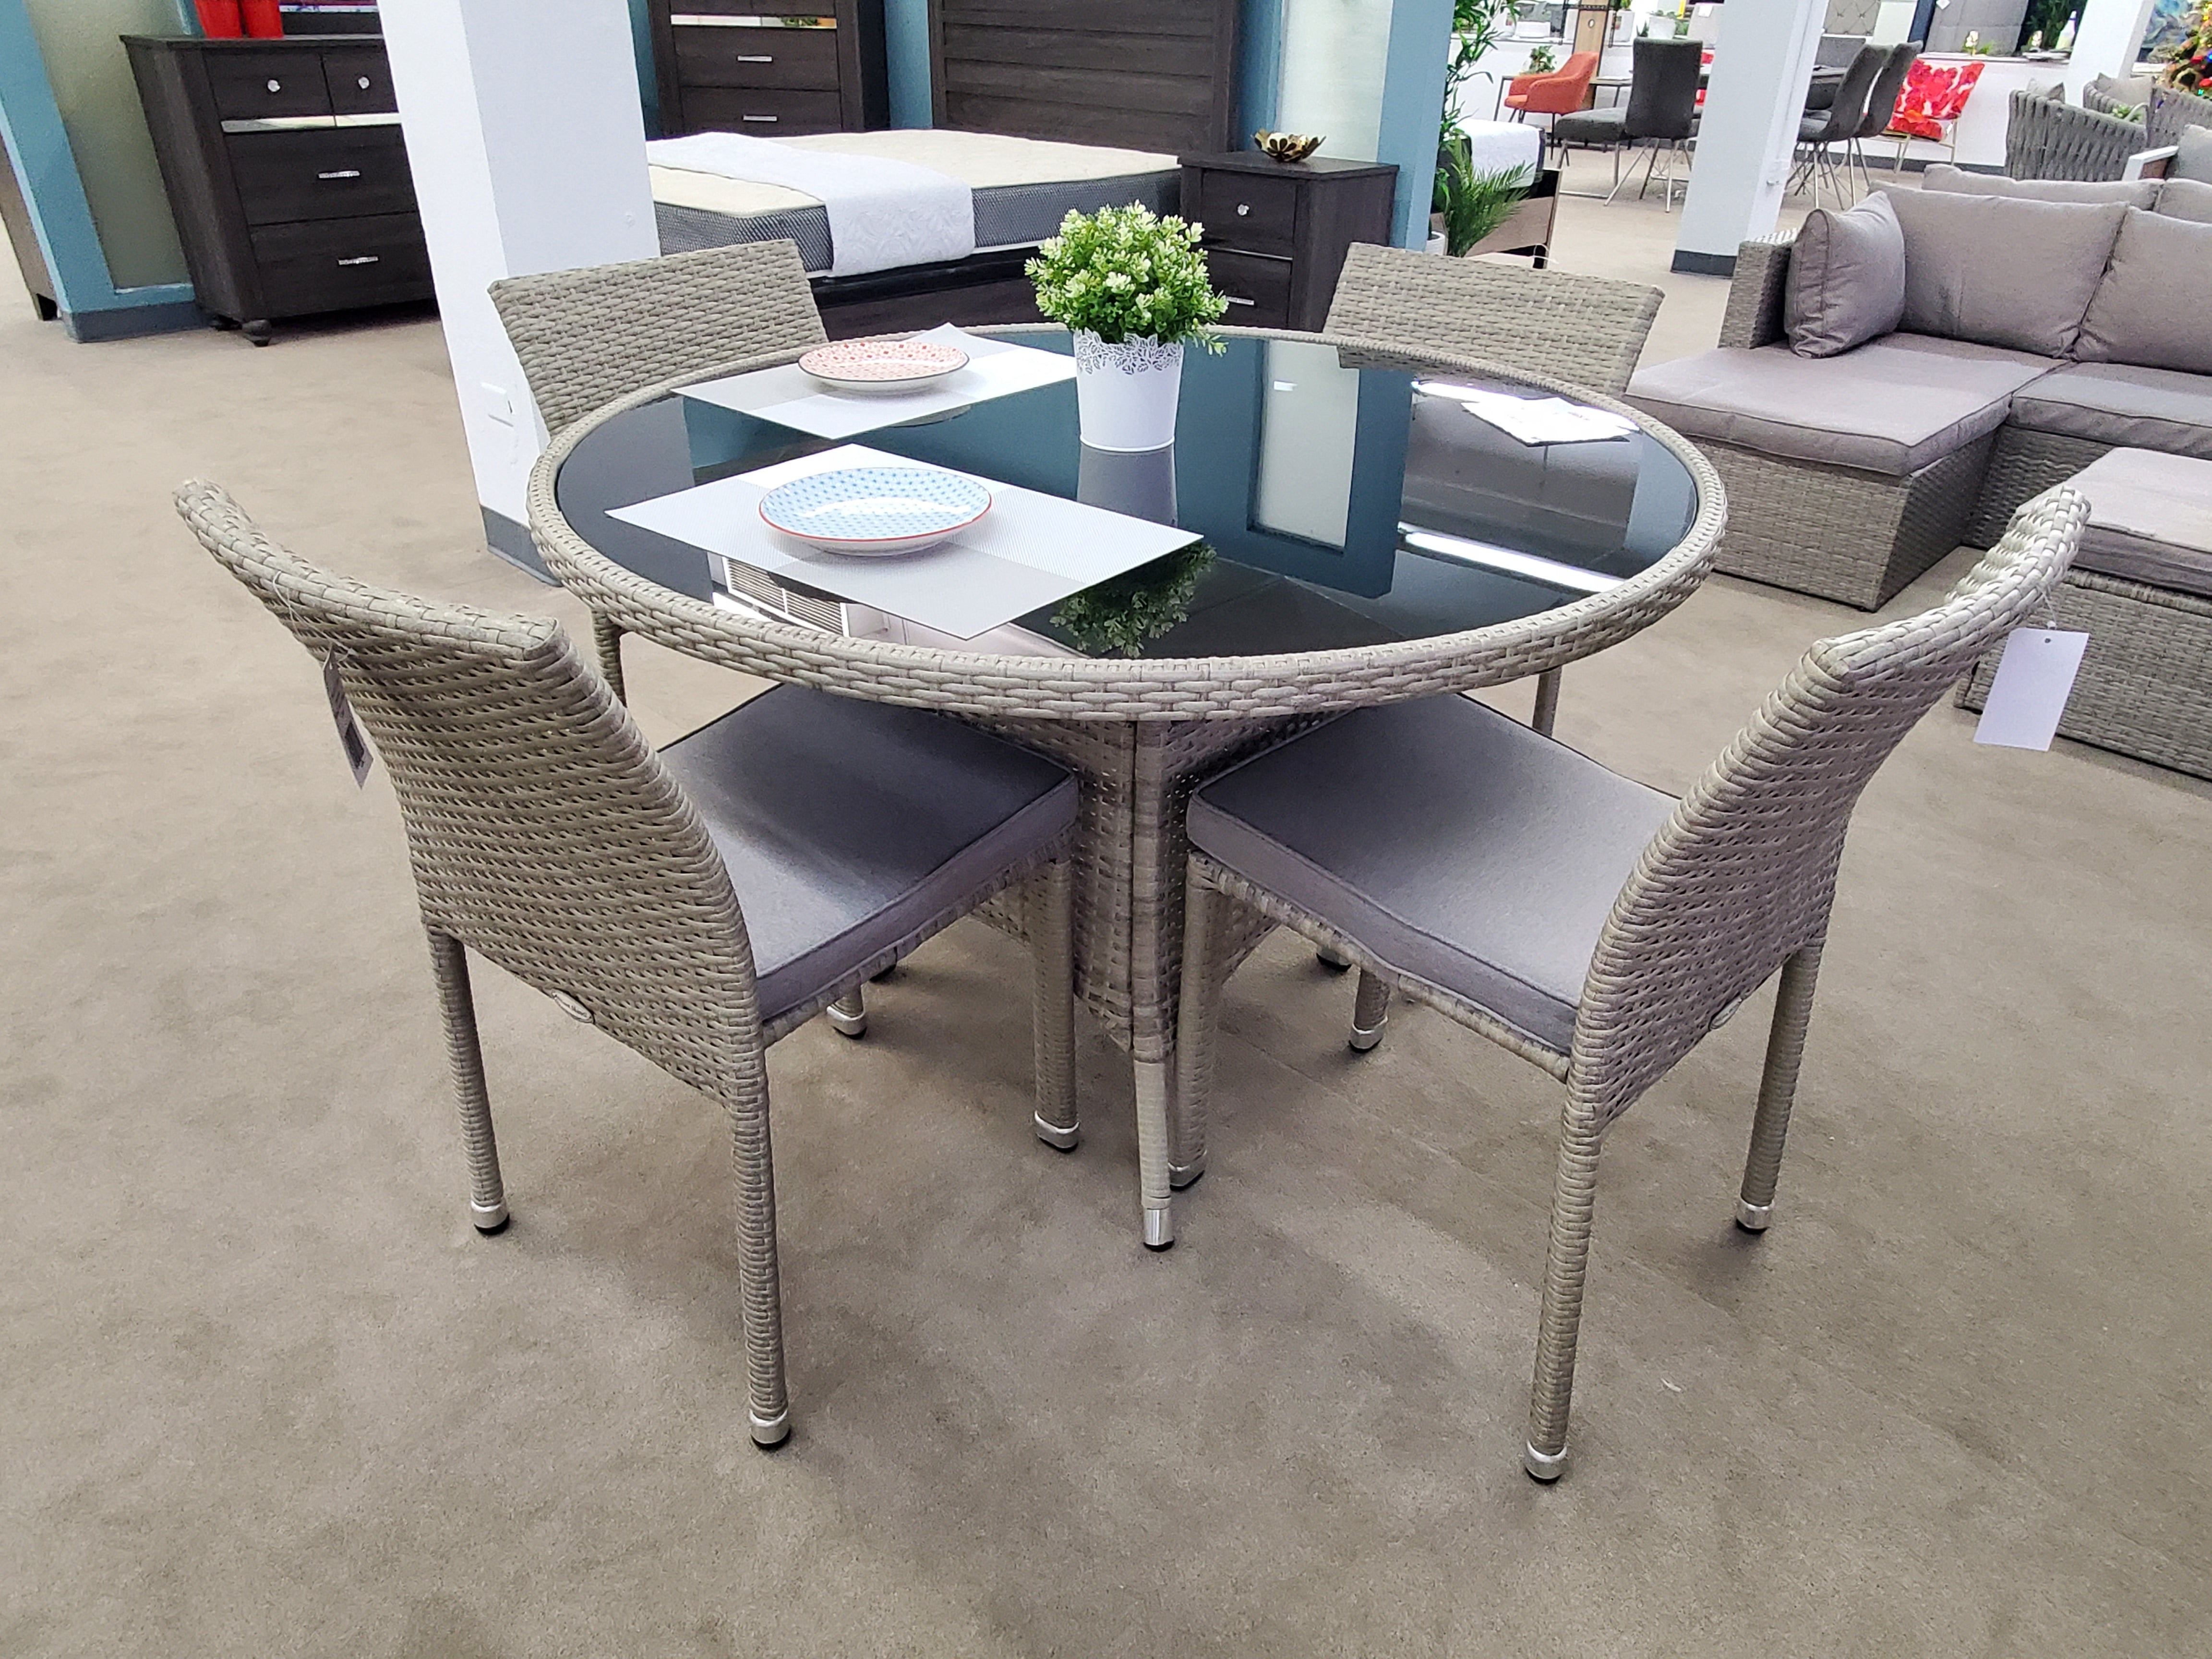 CORCEGA HT-005T Round Dining Table 47" + (4) 95002 Armless Chair Alm Frame/Mixed Grey